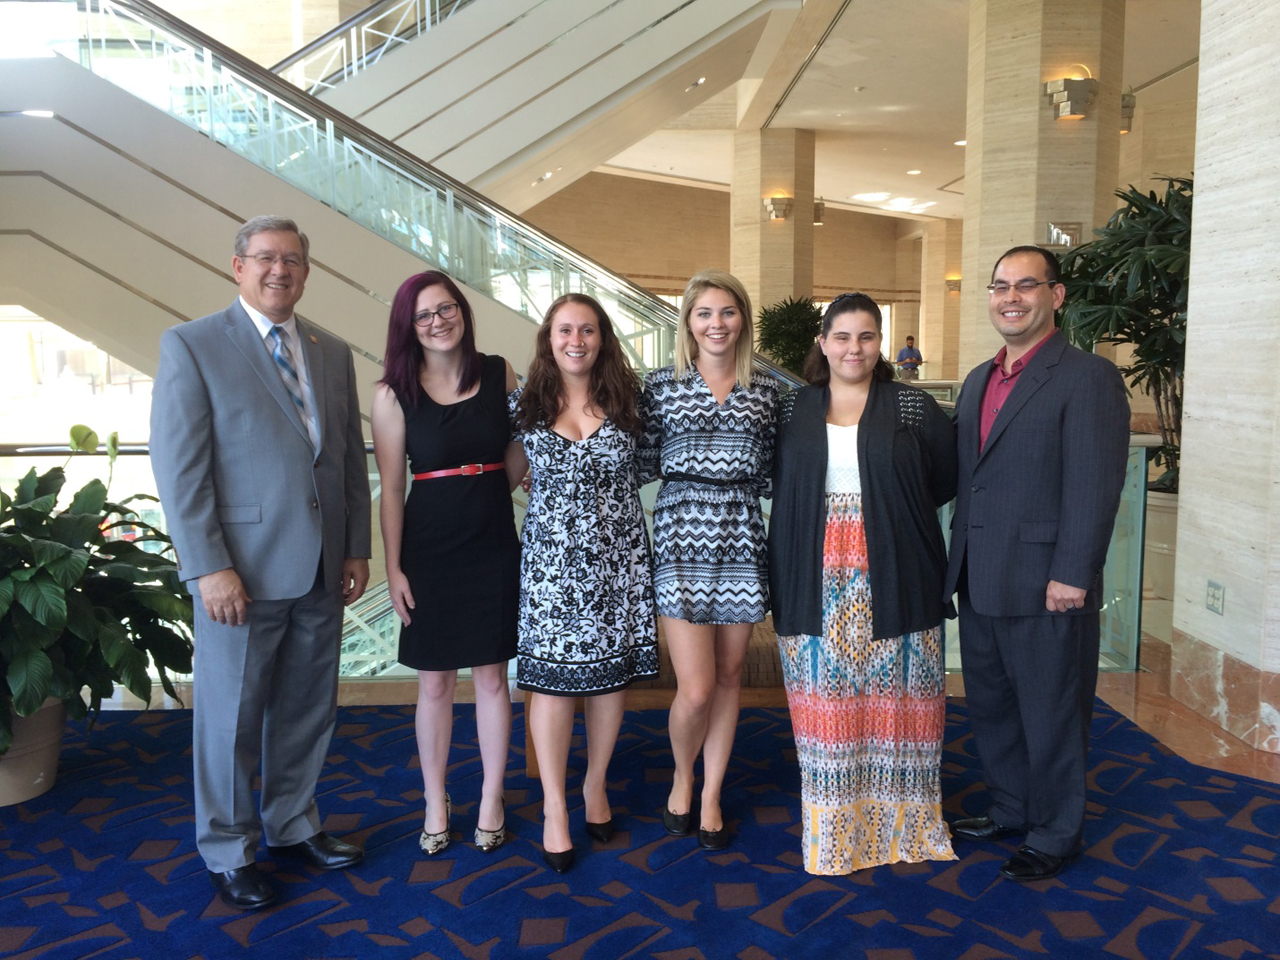 Rep. Cupp met with a group of students from the University of Northwestern Ohio's Paralegal Program.